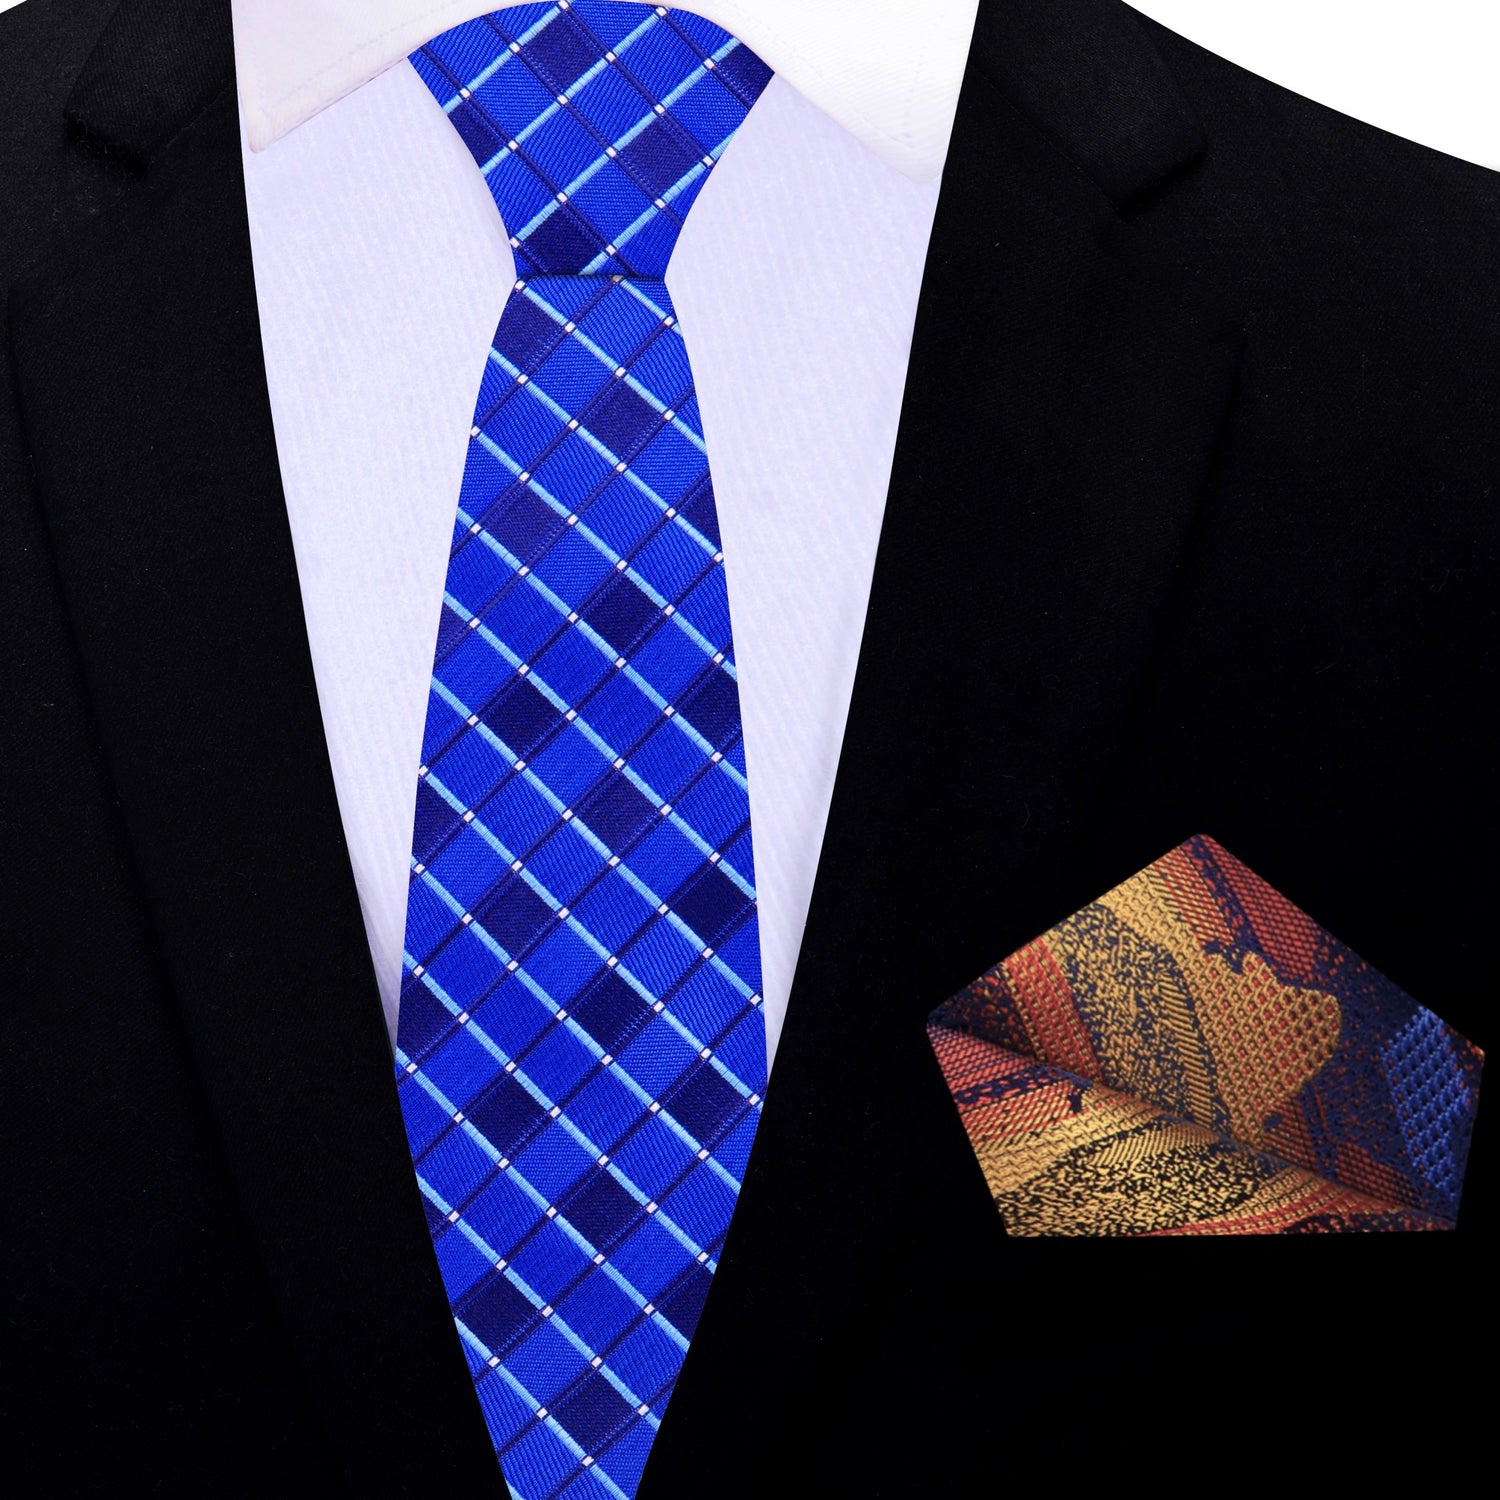 Thin Tie: Shades of Blue Necktie with Orange Red and Blue Abstract Pocket Square